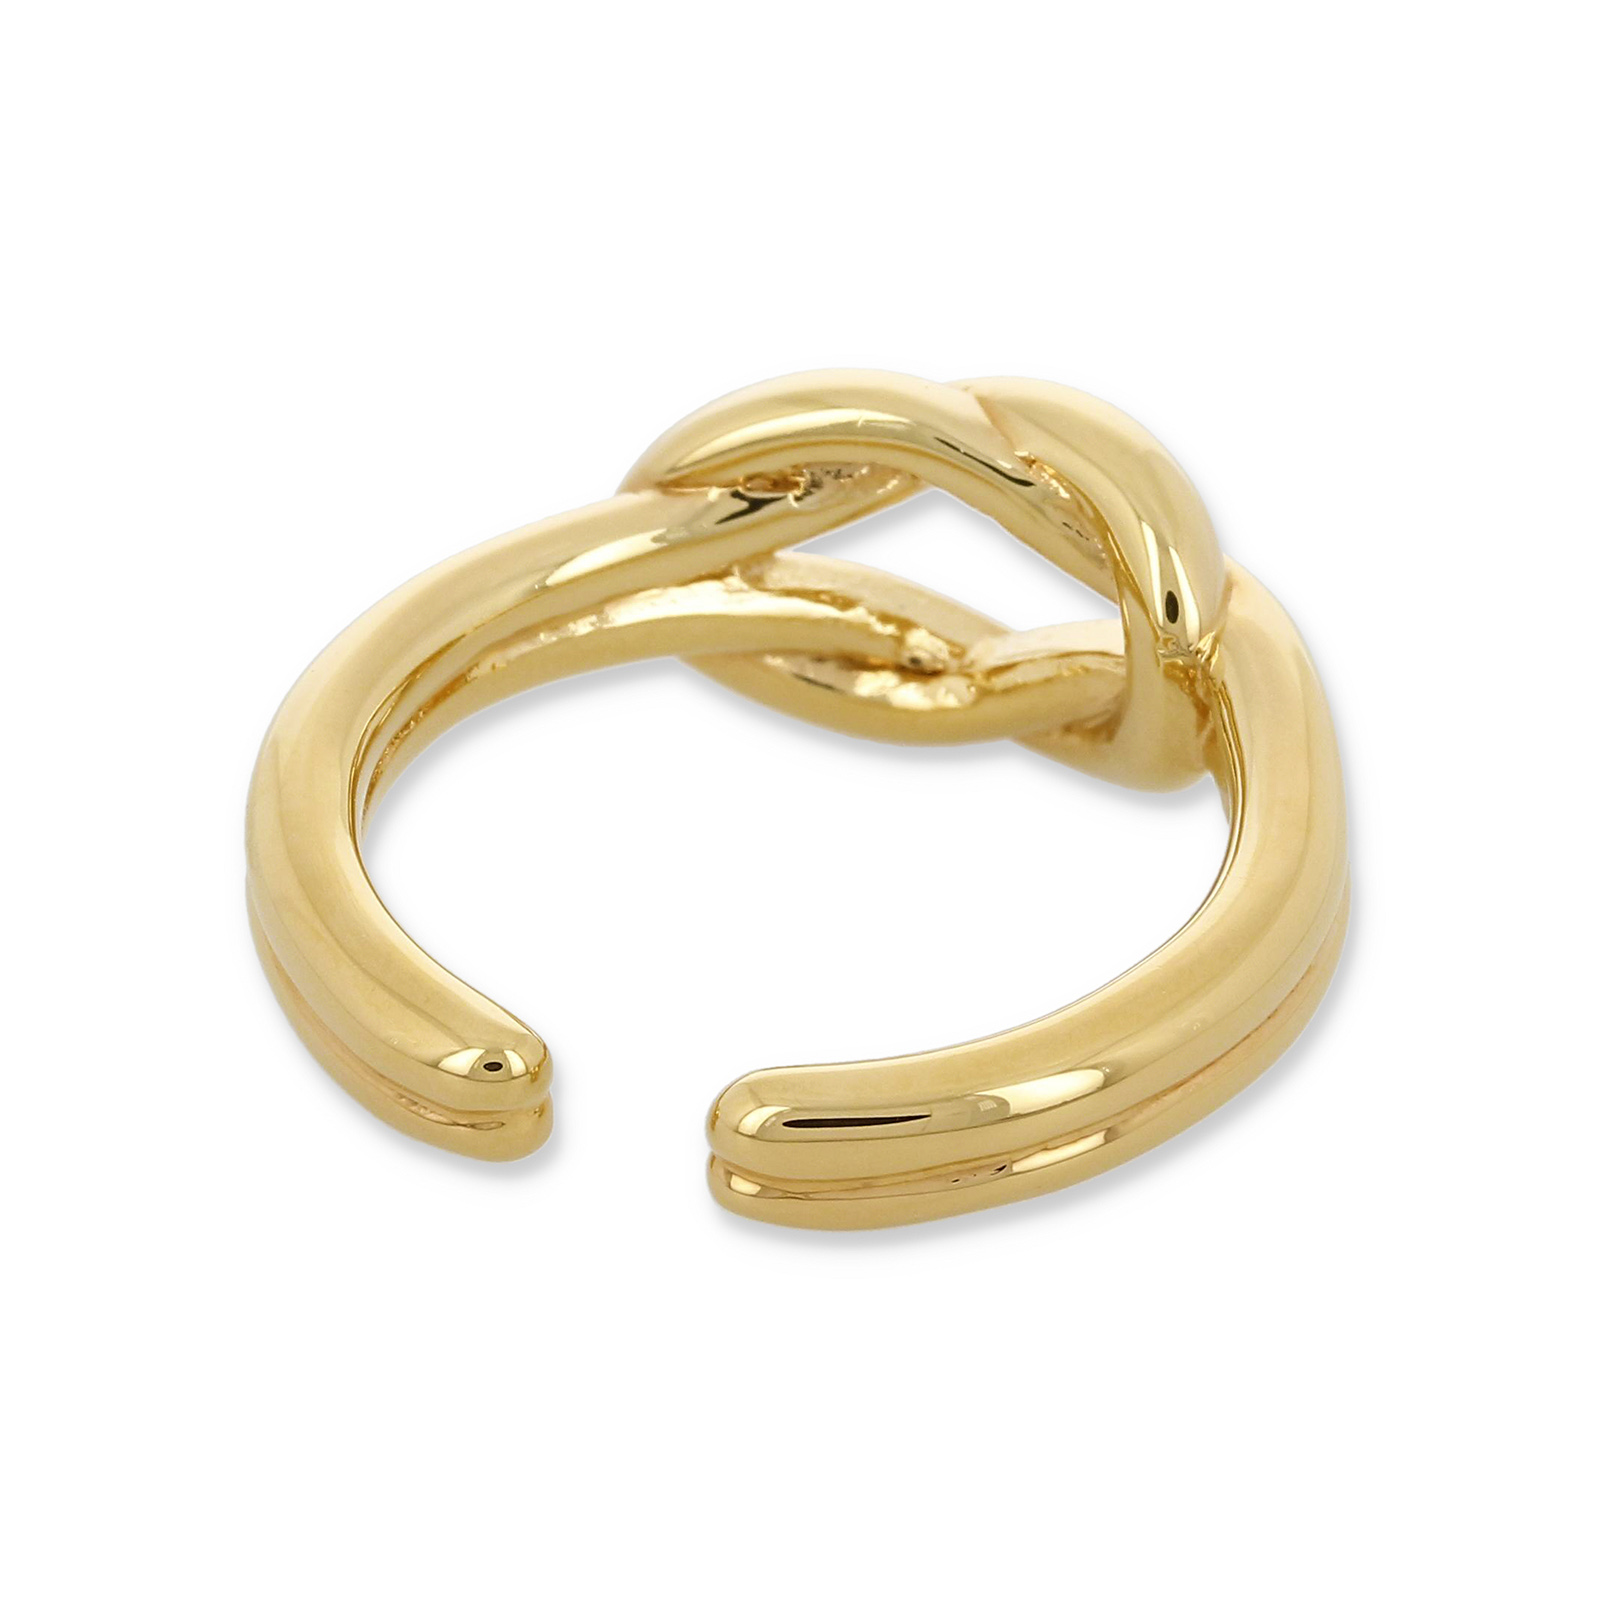 Edy Ring - Light Gold Color